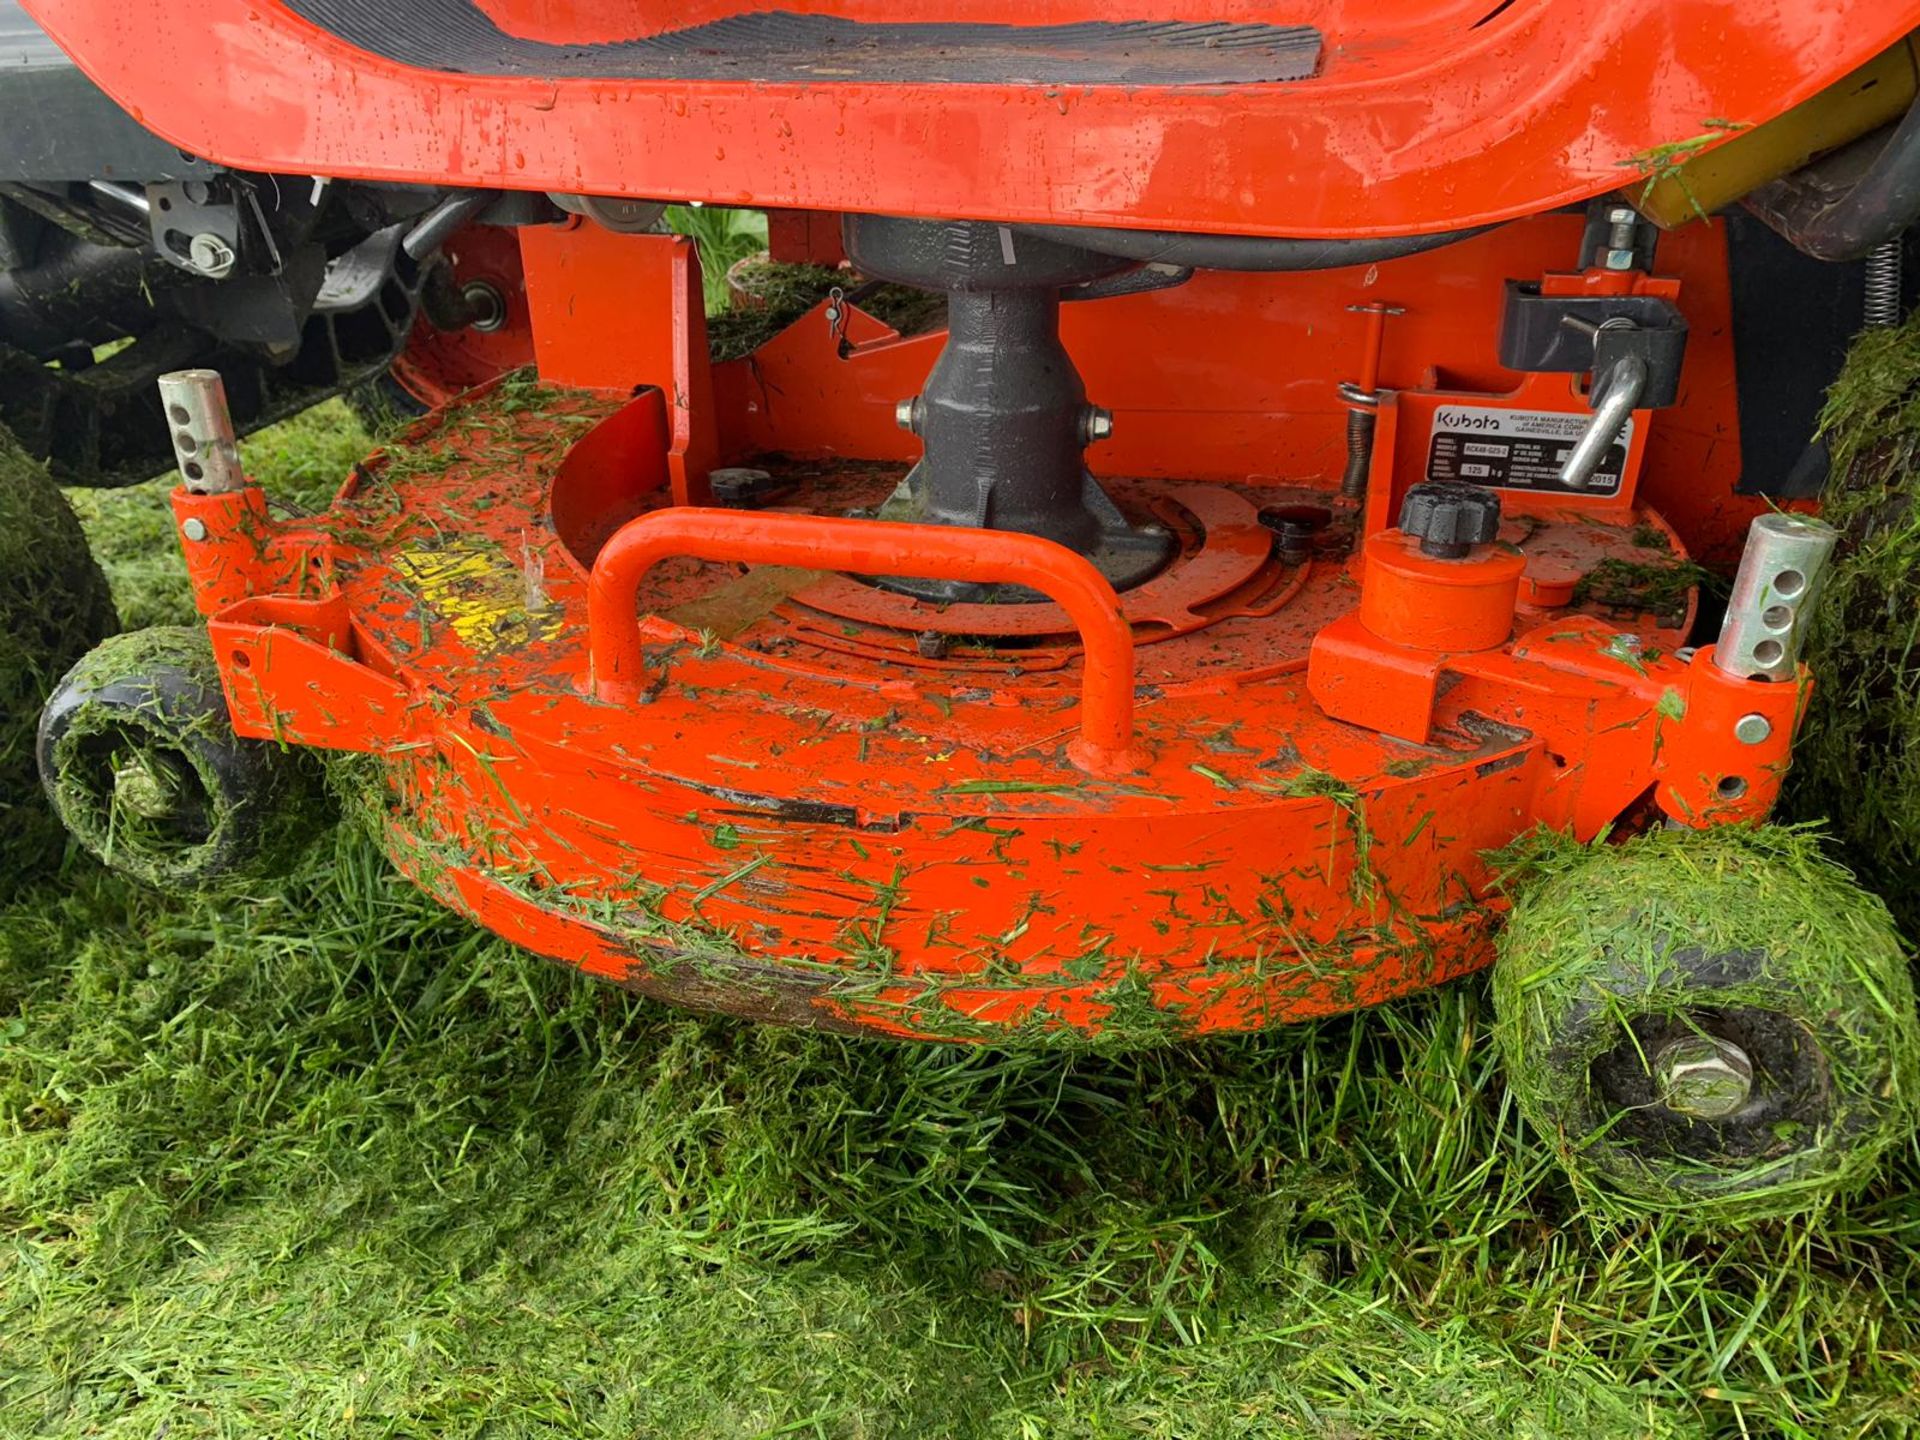 2015 KUBOTA G23-II TWIN CUT LAWN MOWER WITH ROLL BAR, HYDRAULIC TIP, LOW DUMP COLLECTOR - 28 HOURS!! - Image 8 of 15